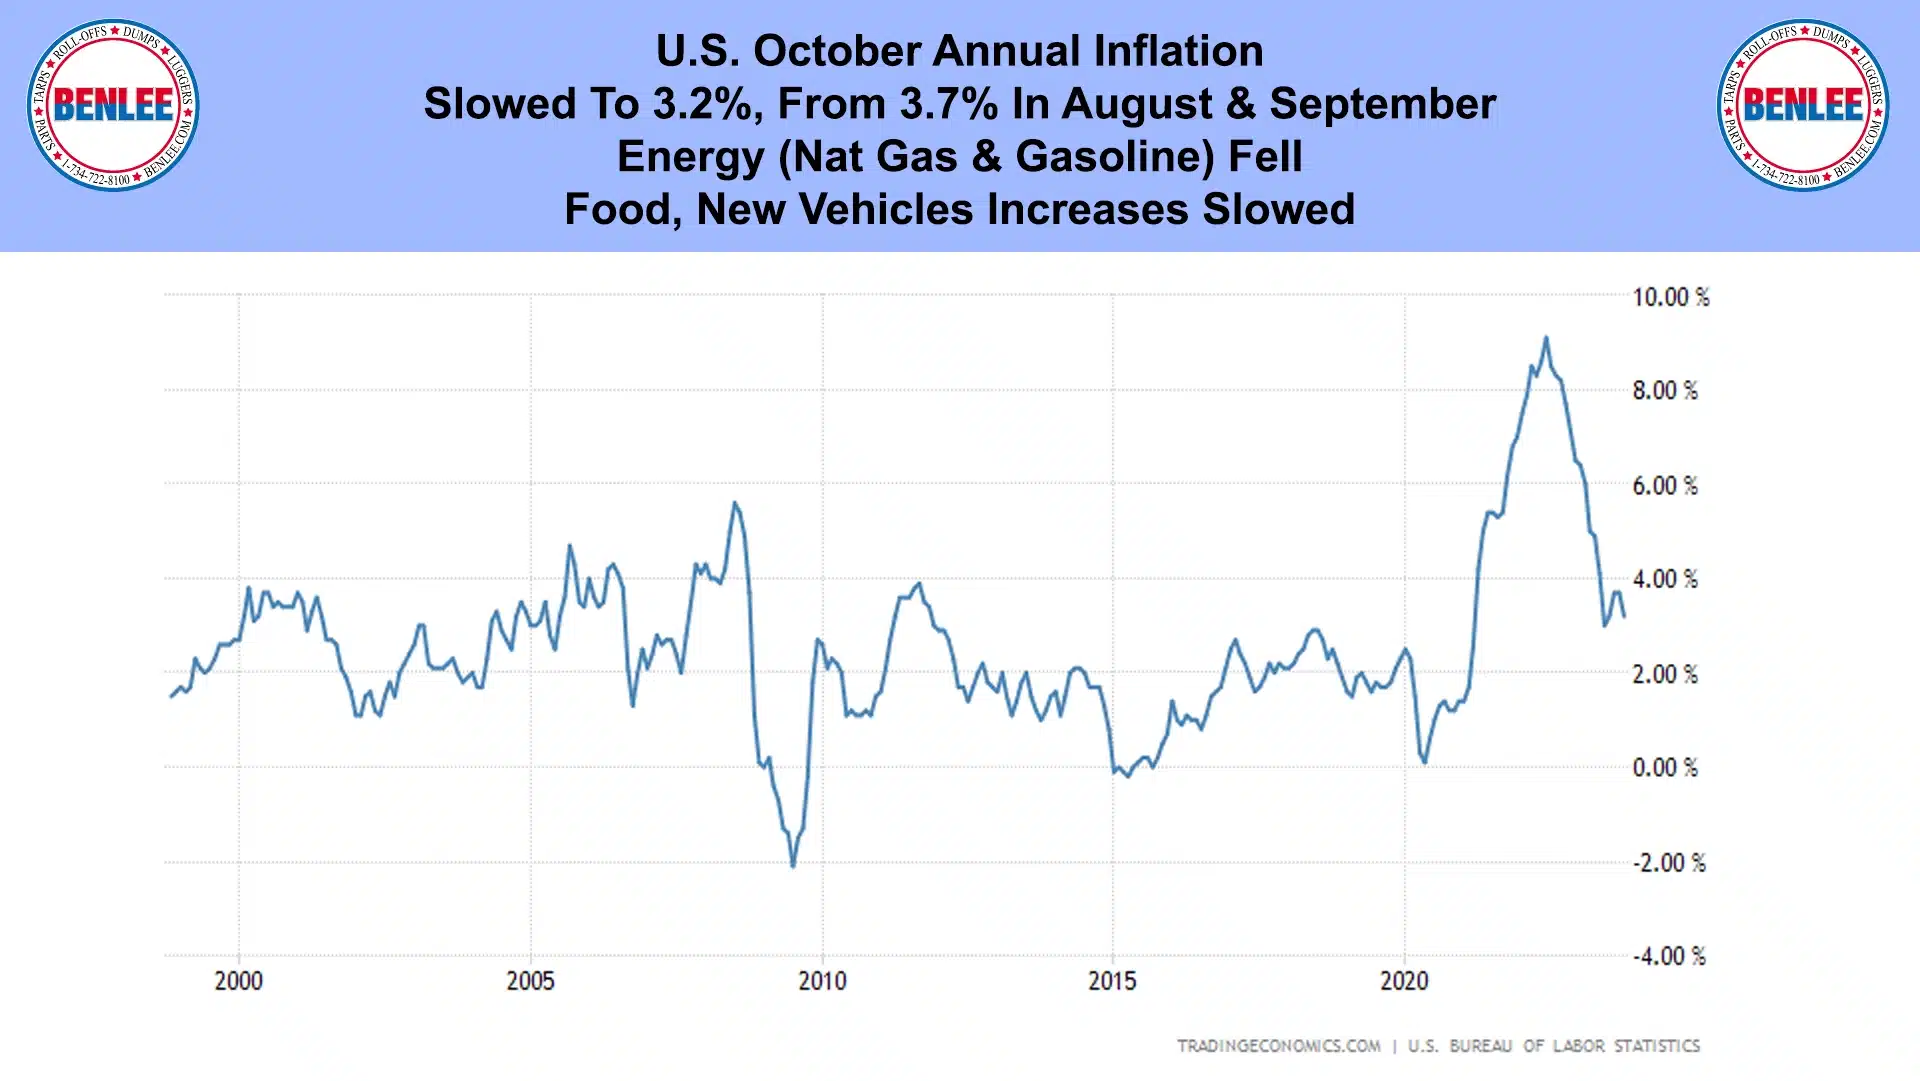 U.S. October Annual Inflation